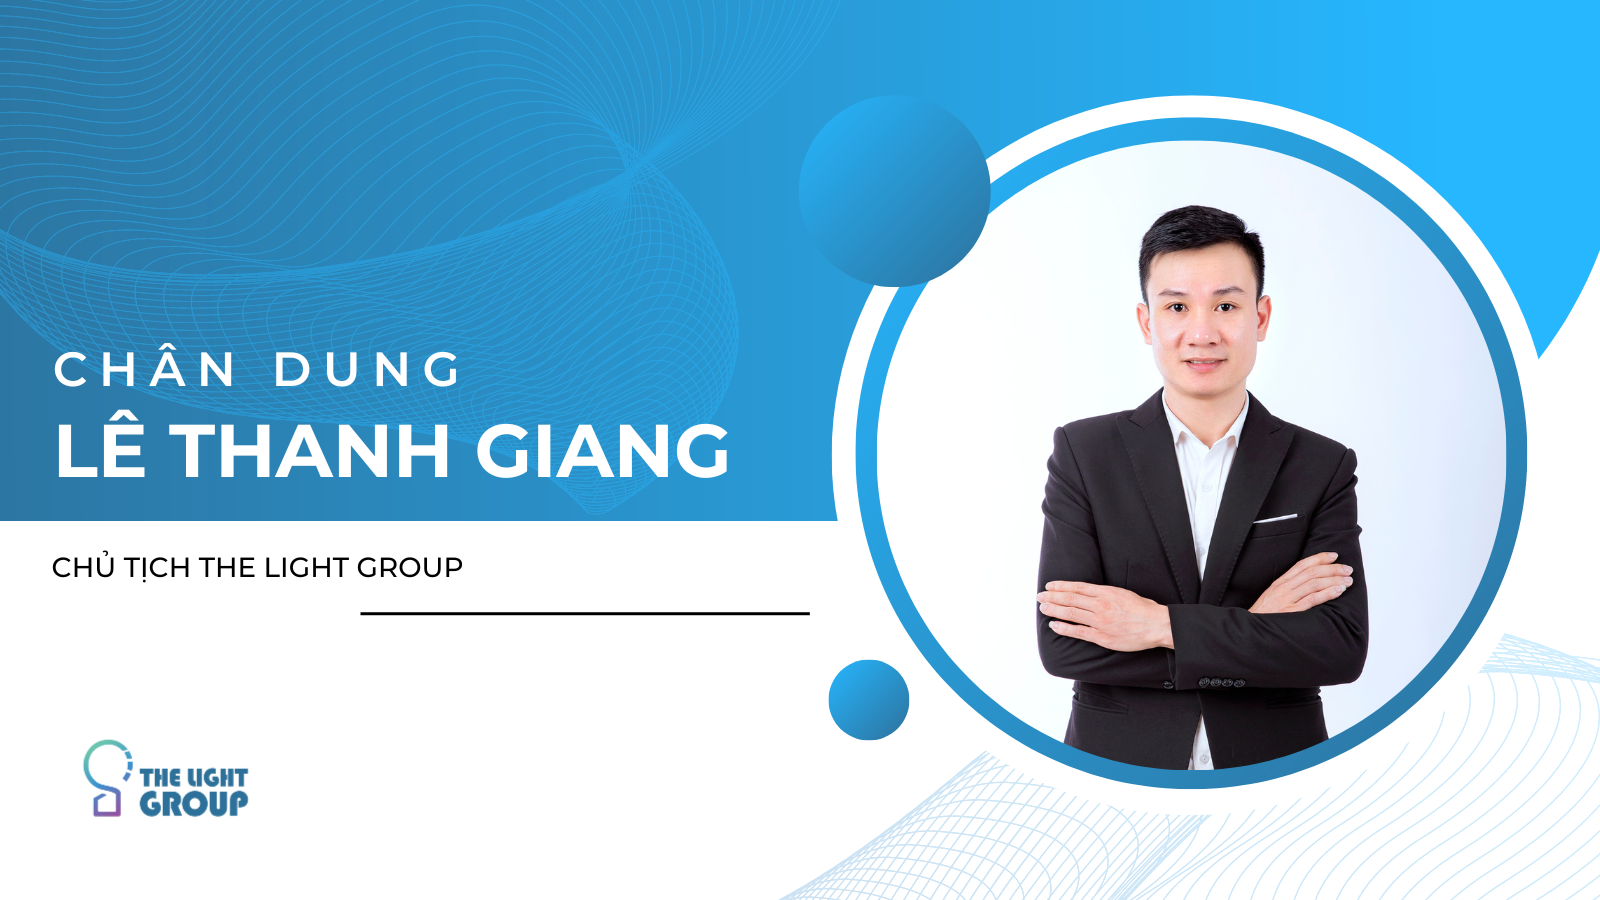 chan-dung-le-thanh-giang-chu-tich-the-light-group-1692851078.png